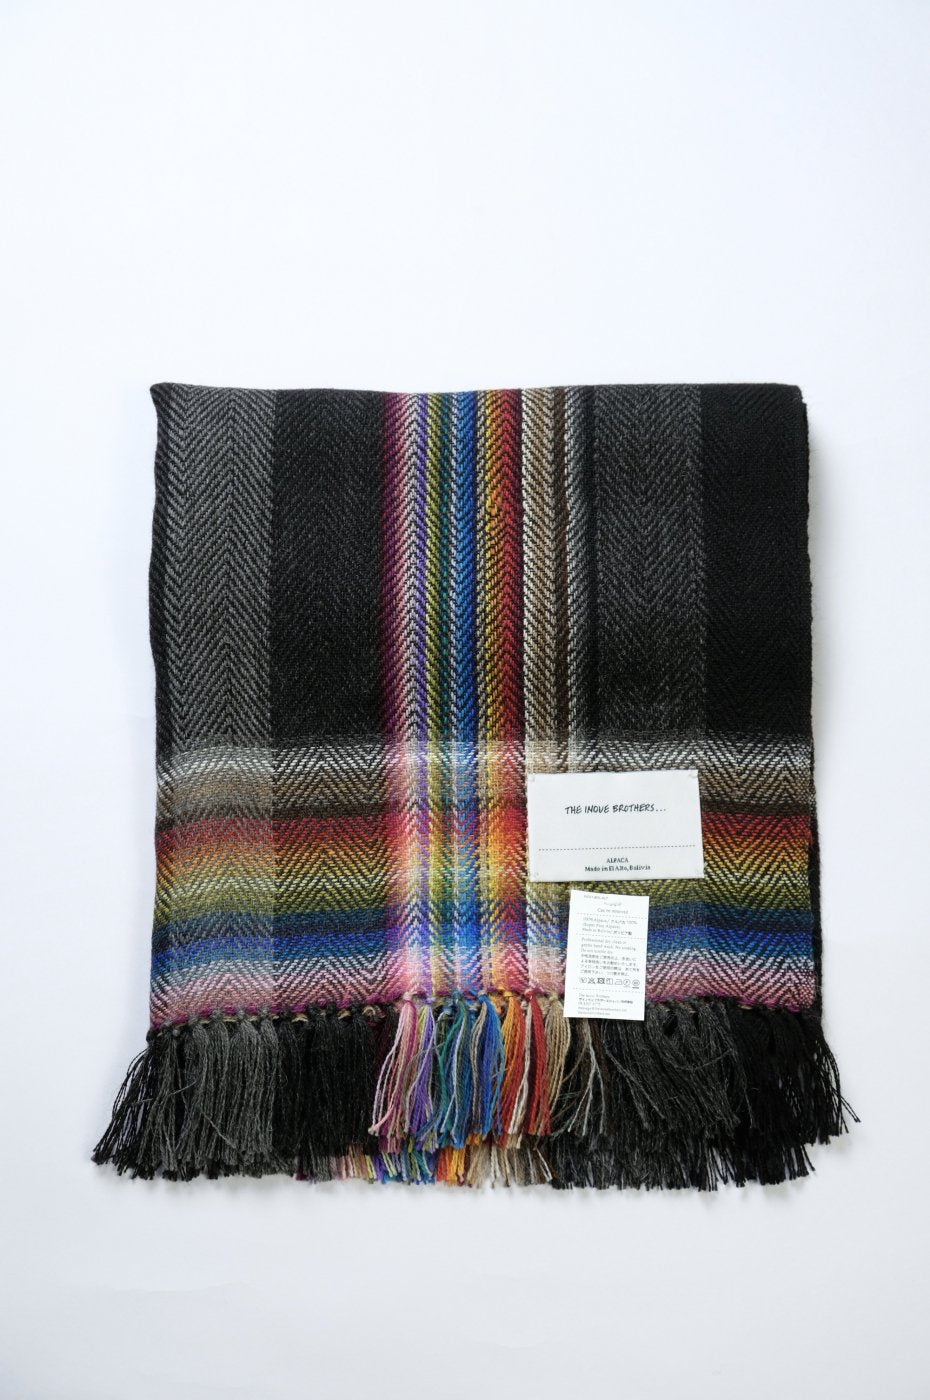 THE INOUE BROTHERS... "Multi Colored Scarf / BLACK"